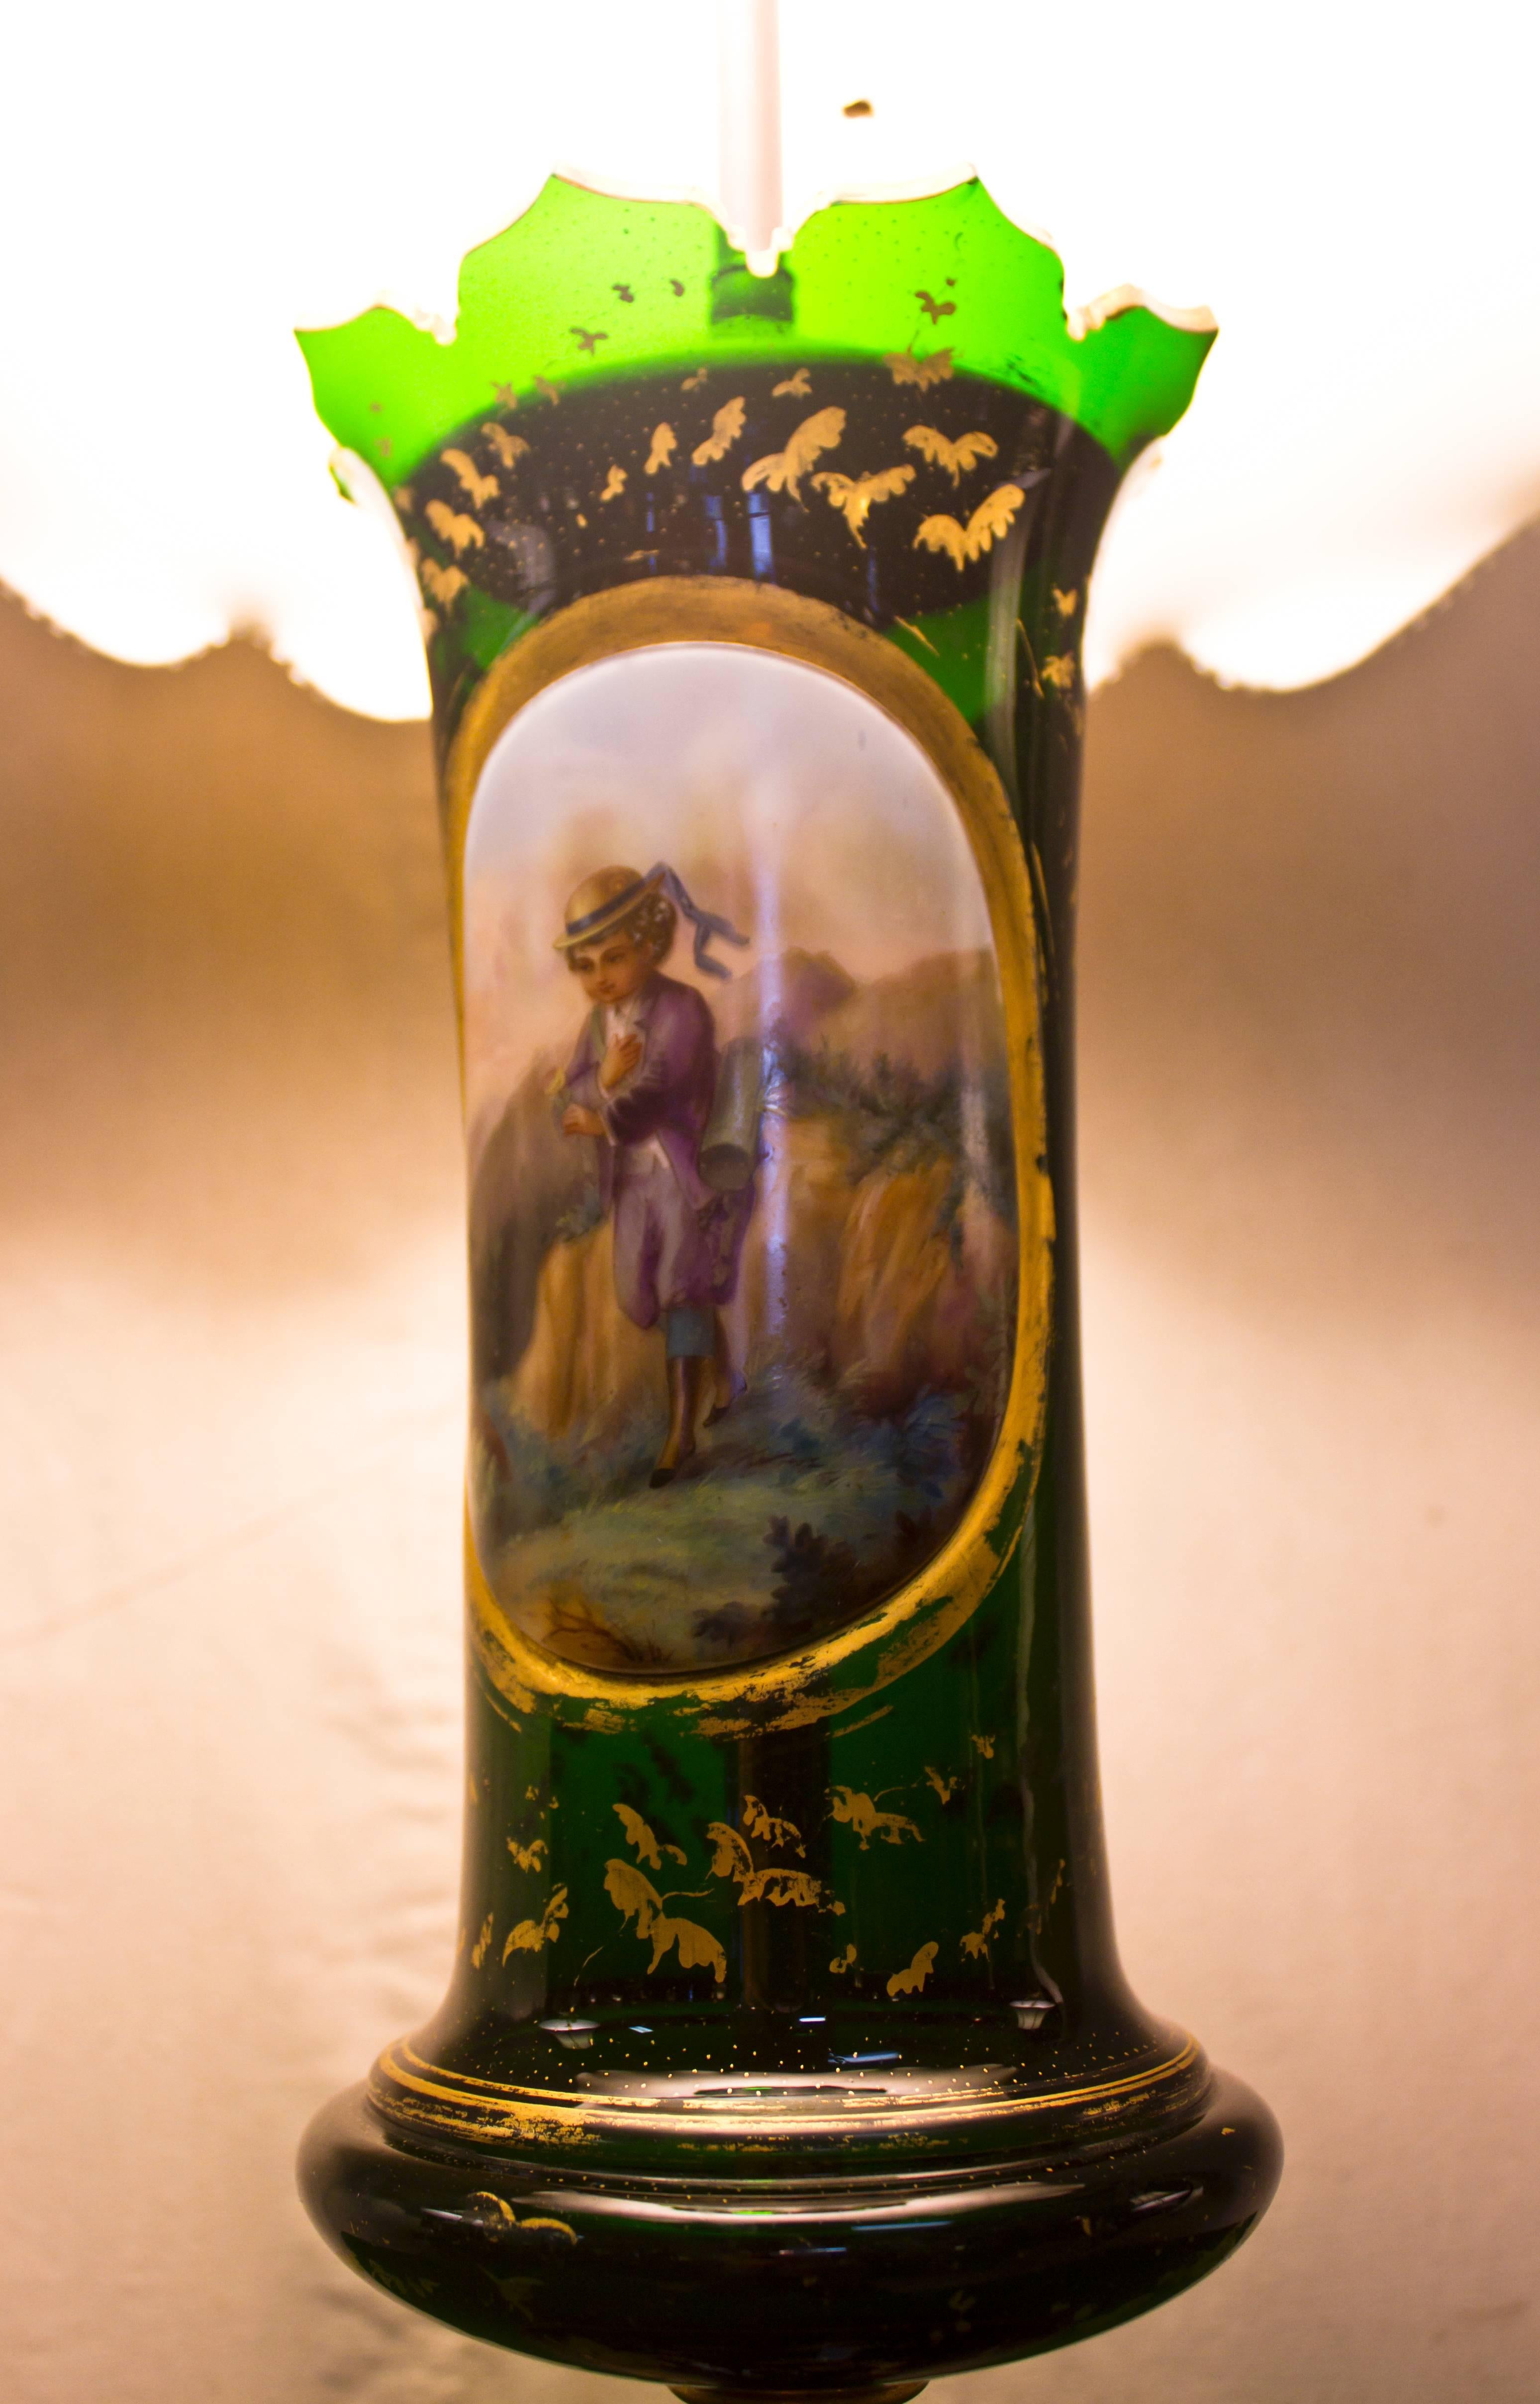 Austrian clear green glass vase converted into a handsome lamp. Featuring a scalloped top with a hand-painted scene of a little boy carrying a vasculum and collecting flowers in an Alpine setting. Gold leafing is highlighted throughout the glass.